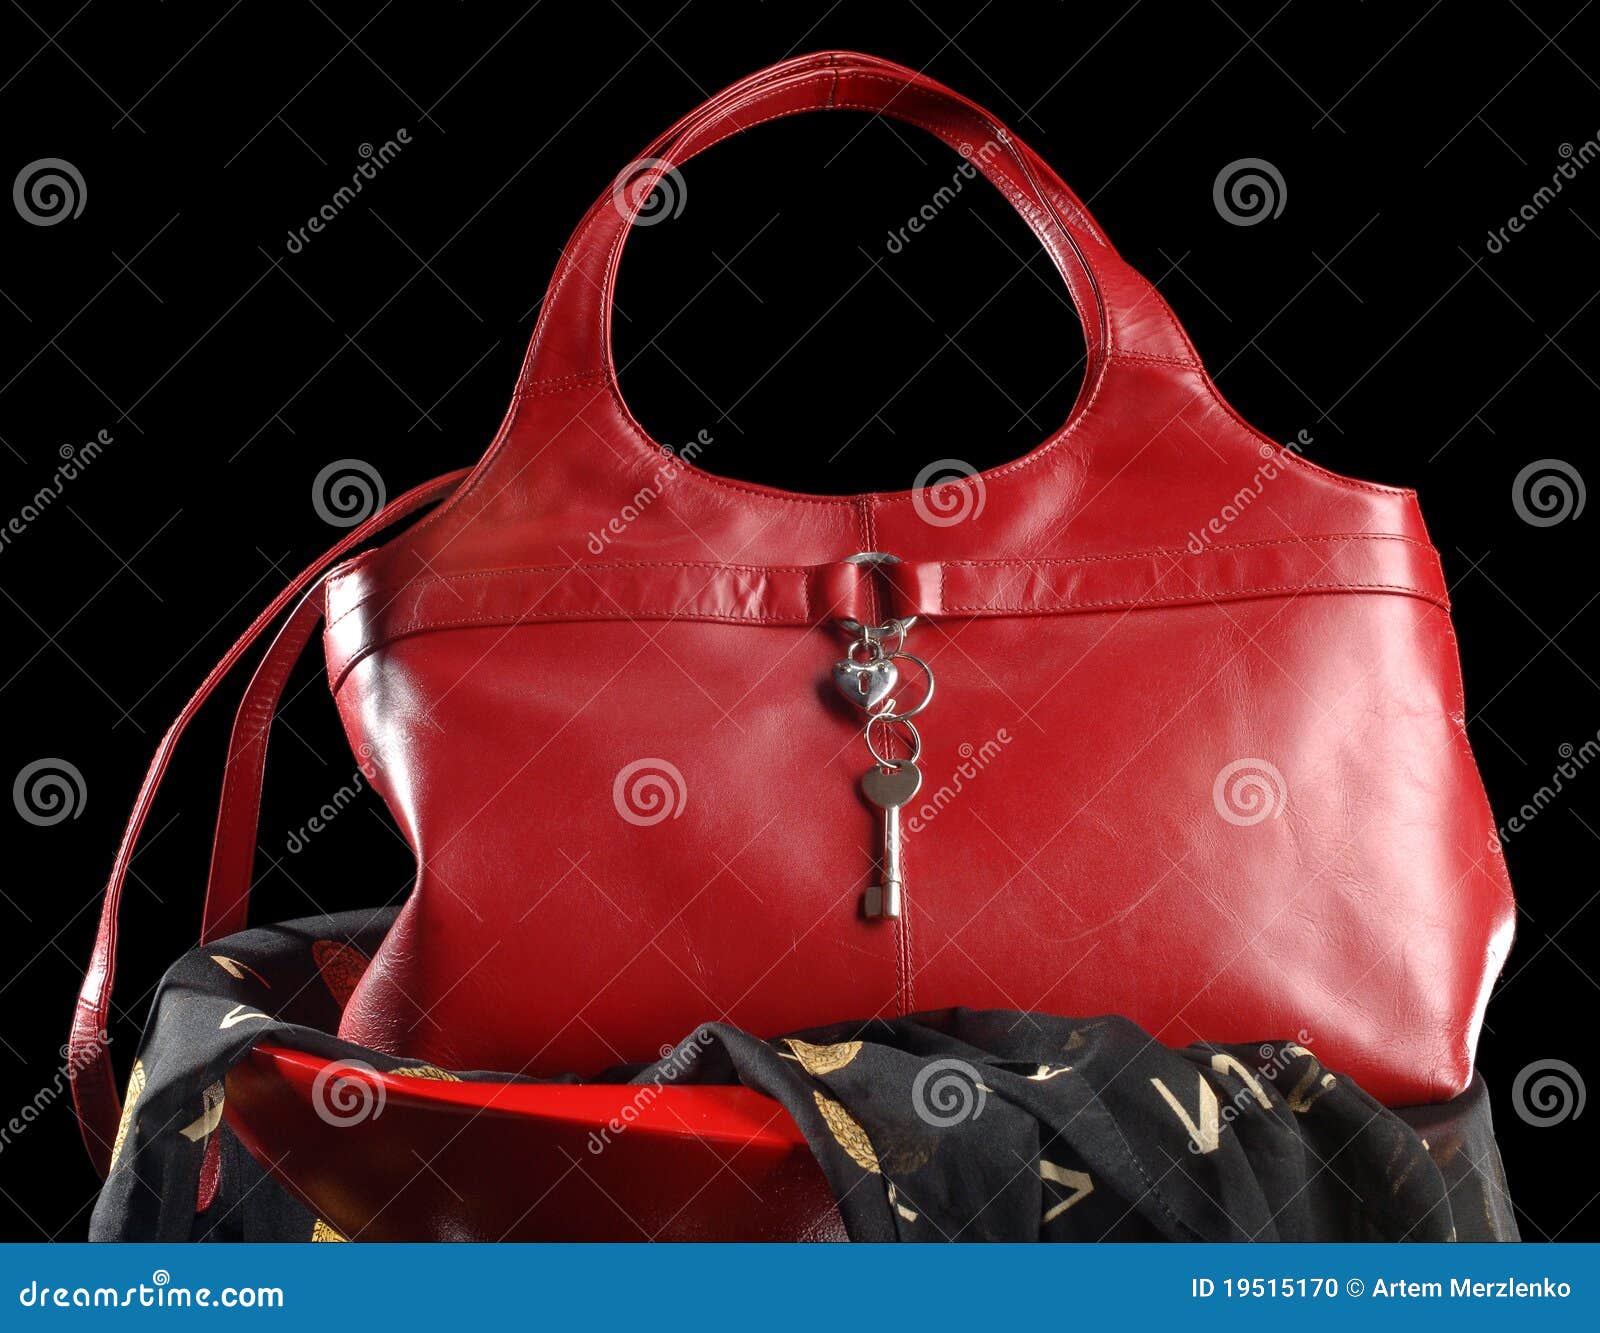 Red leather handbag stock photo. Image of black, accessories - 19515170